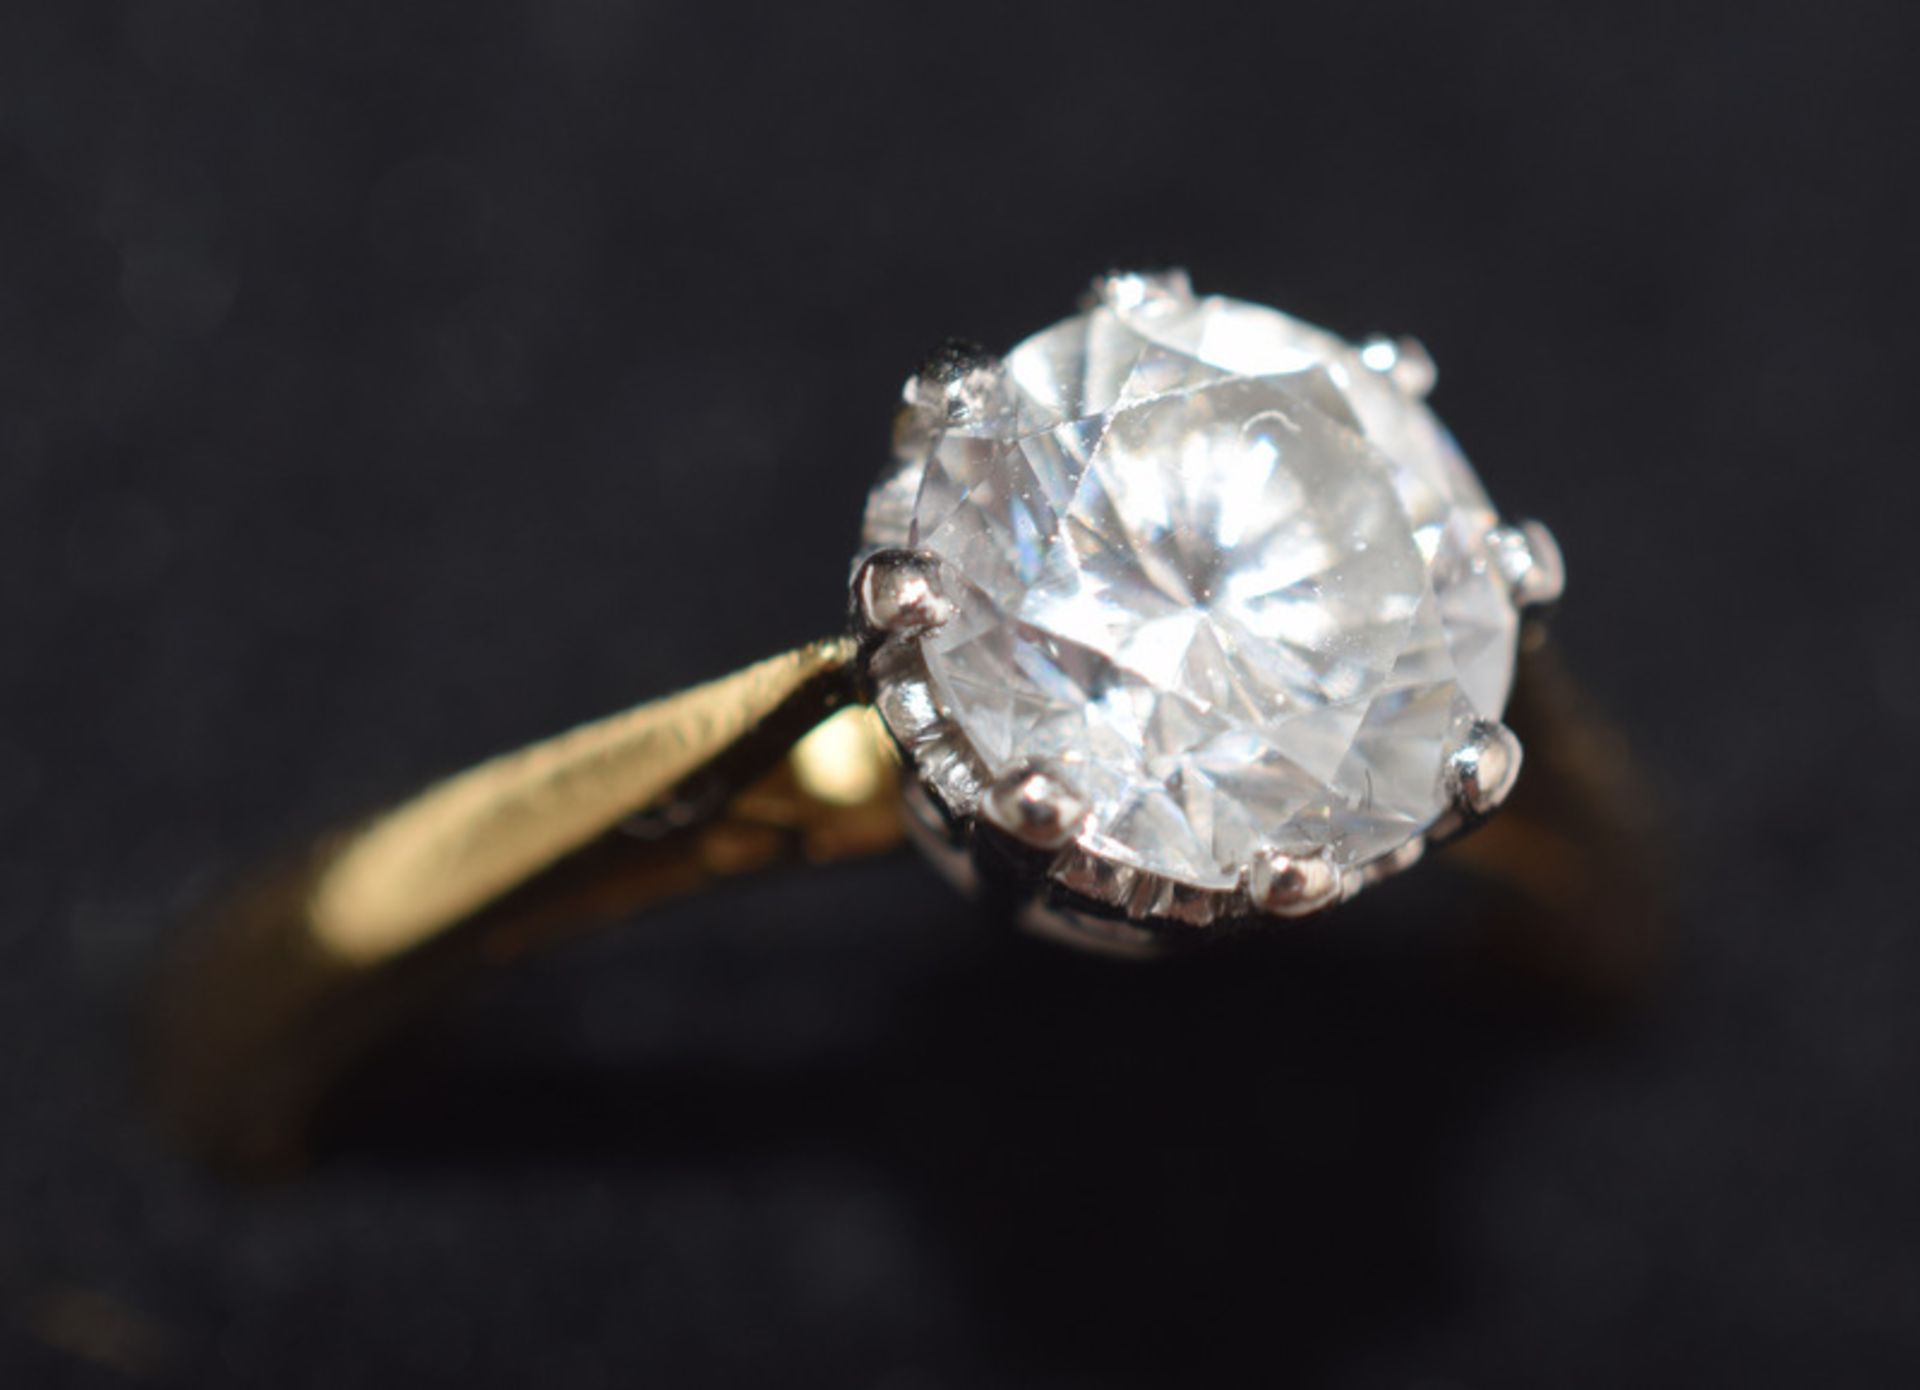 18ct Gold Engagement Ring With 1ct CZ Stone - Image 3 of 7